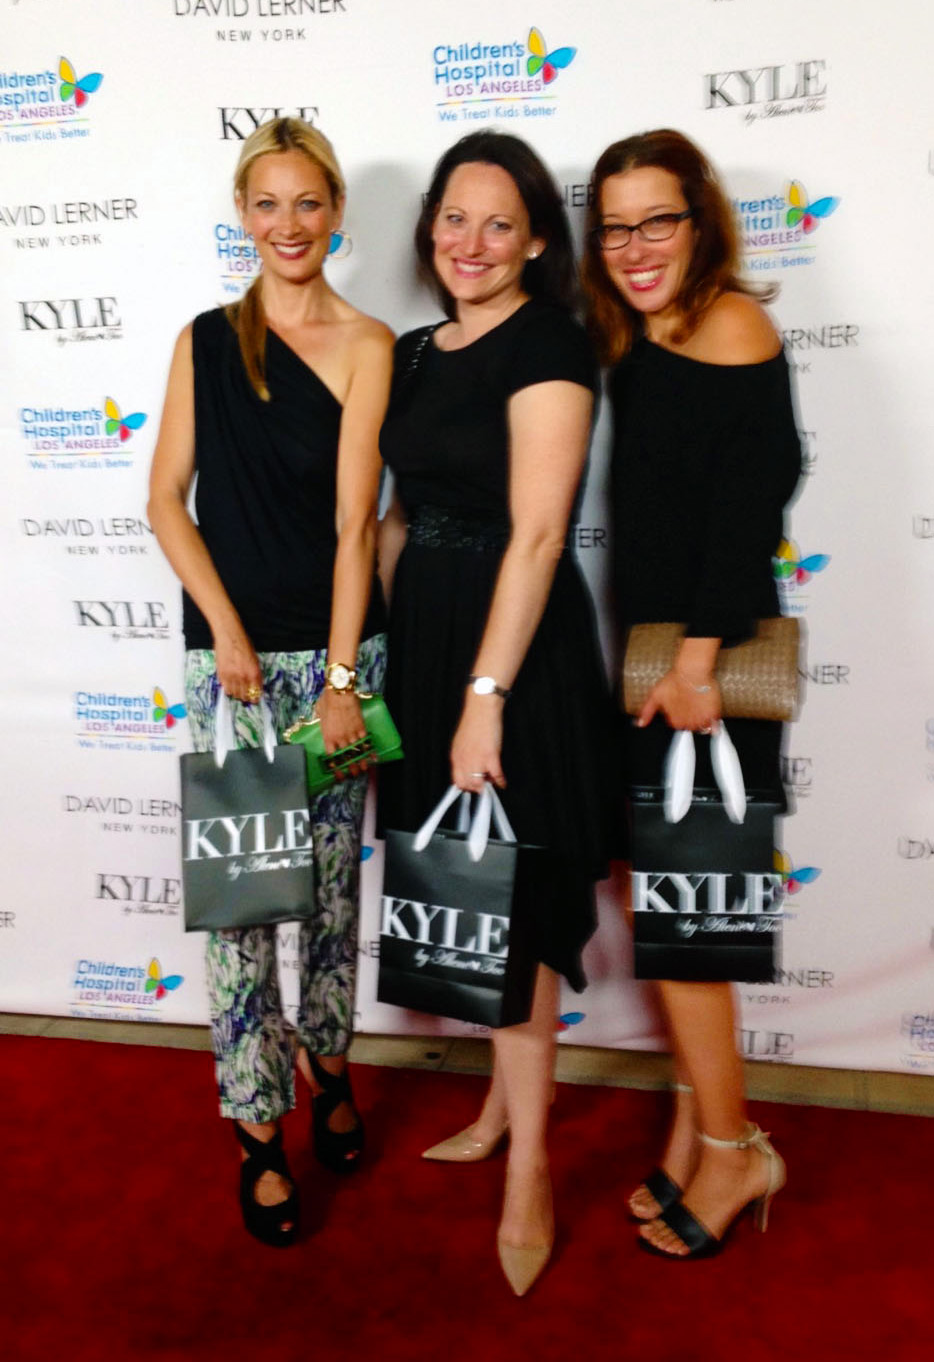 Blueyed Producer Jamee Natella at the Children's Hospital Los Angeles Fundraiser, sponsored by Kyle of Alene Too.